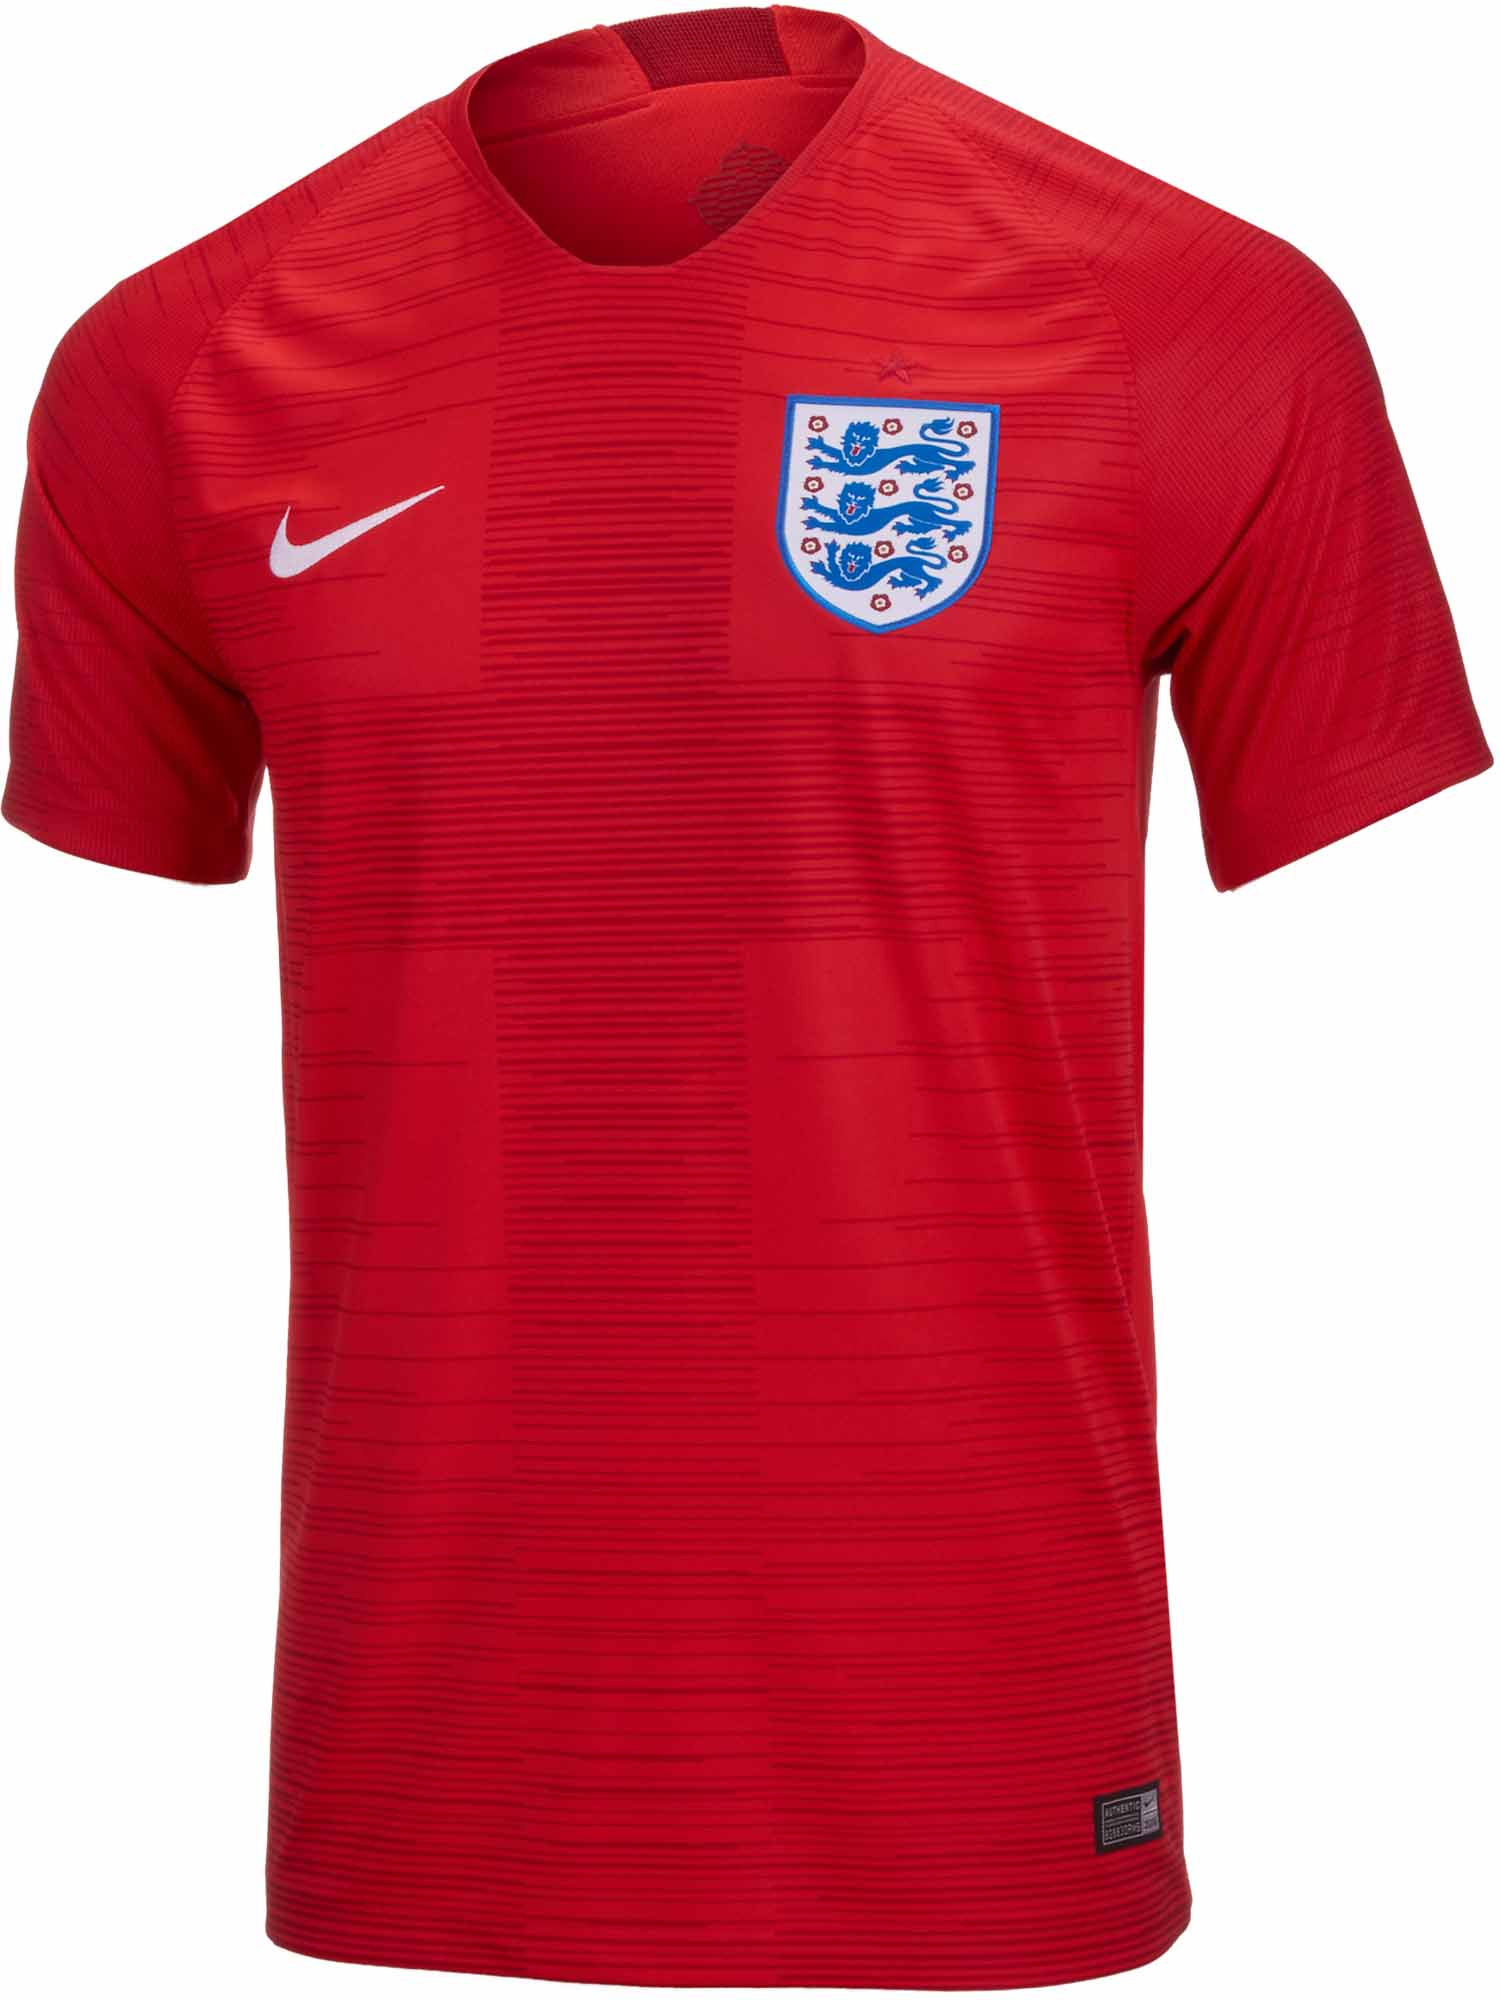 england soccer jersey,Save up to